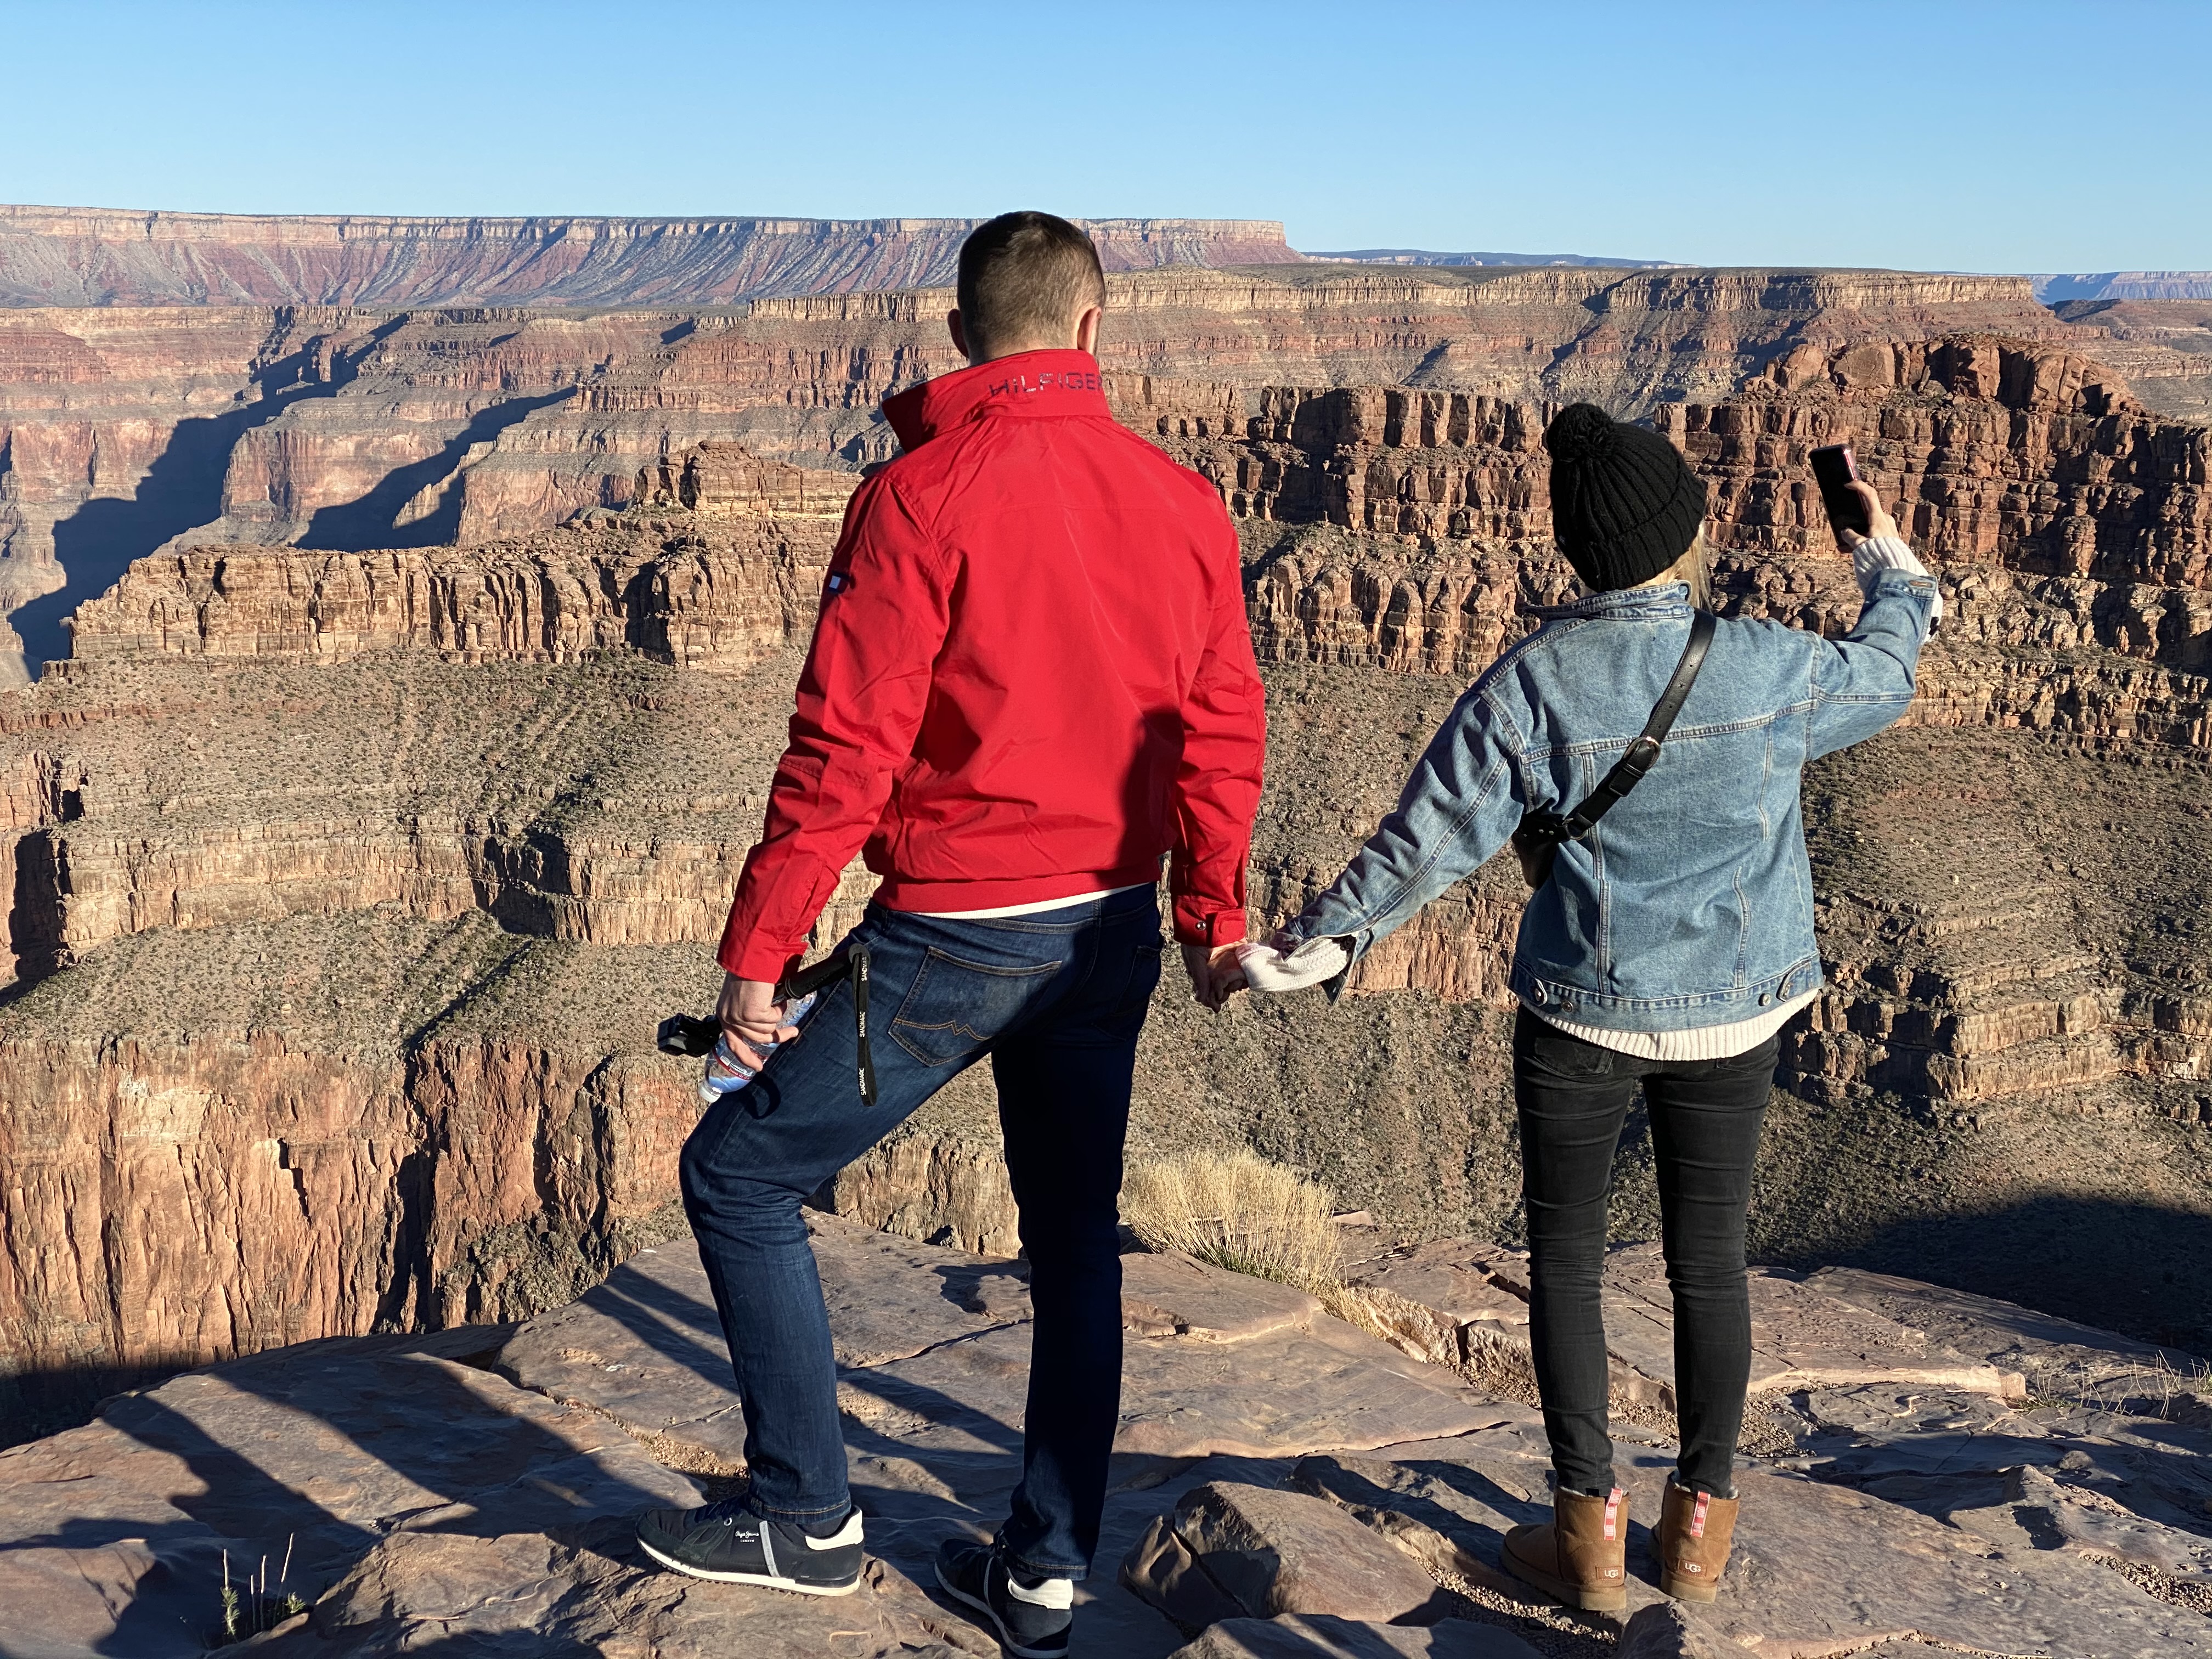 Grand Canyon West Rim Day Tour and Hoover Dam Photo Stop with Skywalk and Lunch (CHD)